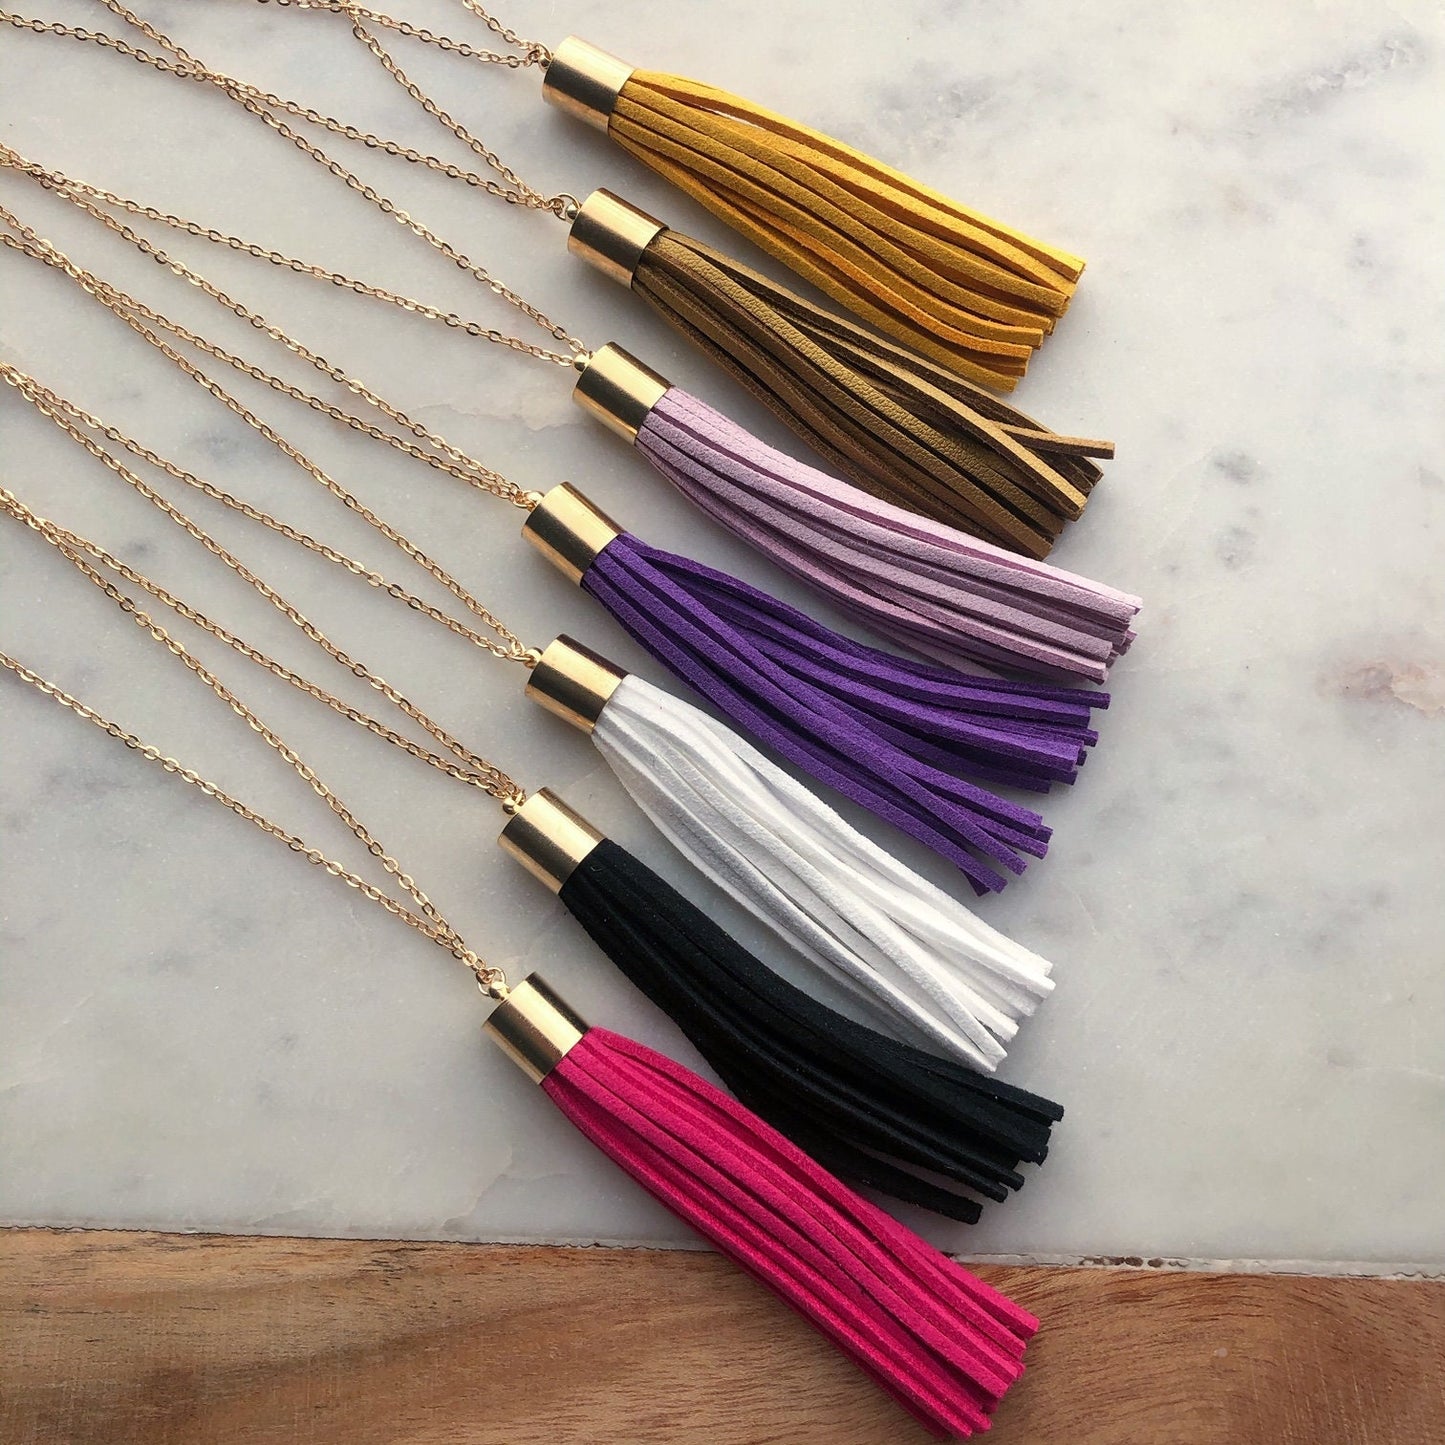 Colorful Tassel Necklace, Colorful Jewelry, Statement Necklace, Tassel Jewelry, Fringe Necklace, Jewelry Gift for Her, Summer Jewelry